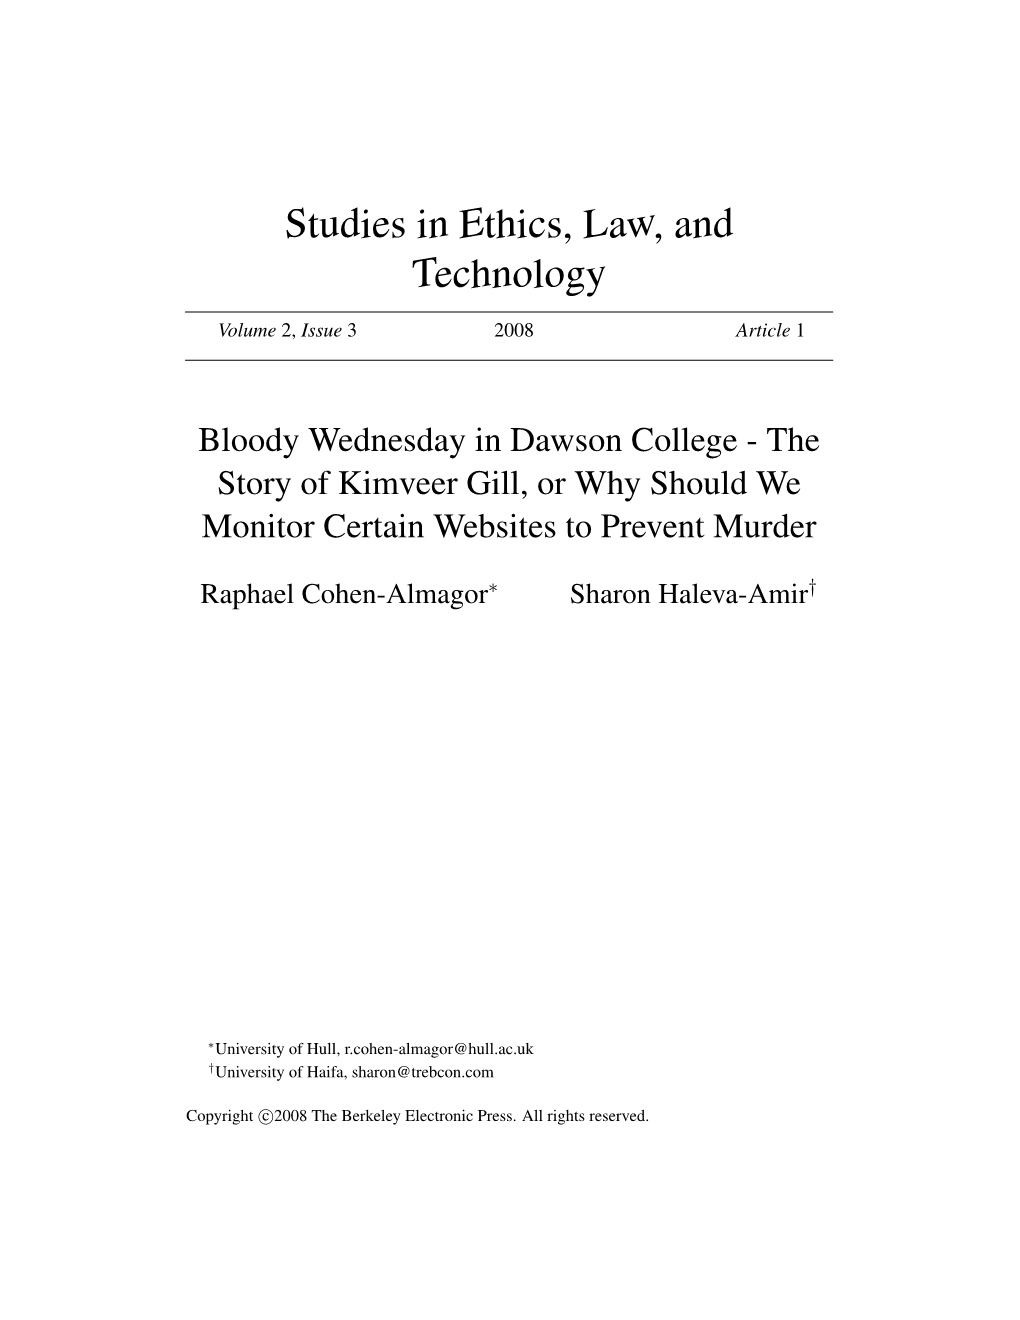 Studies in Ethics, Law, and Technology